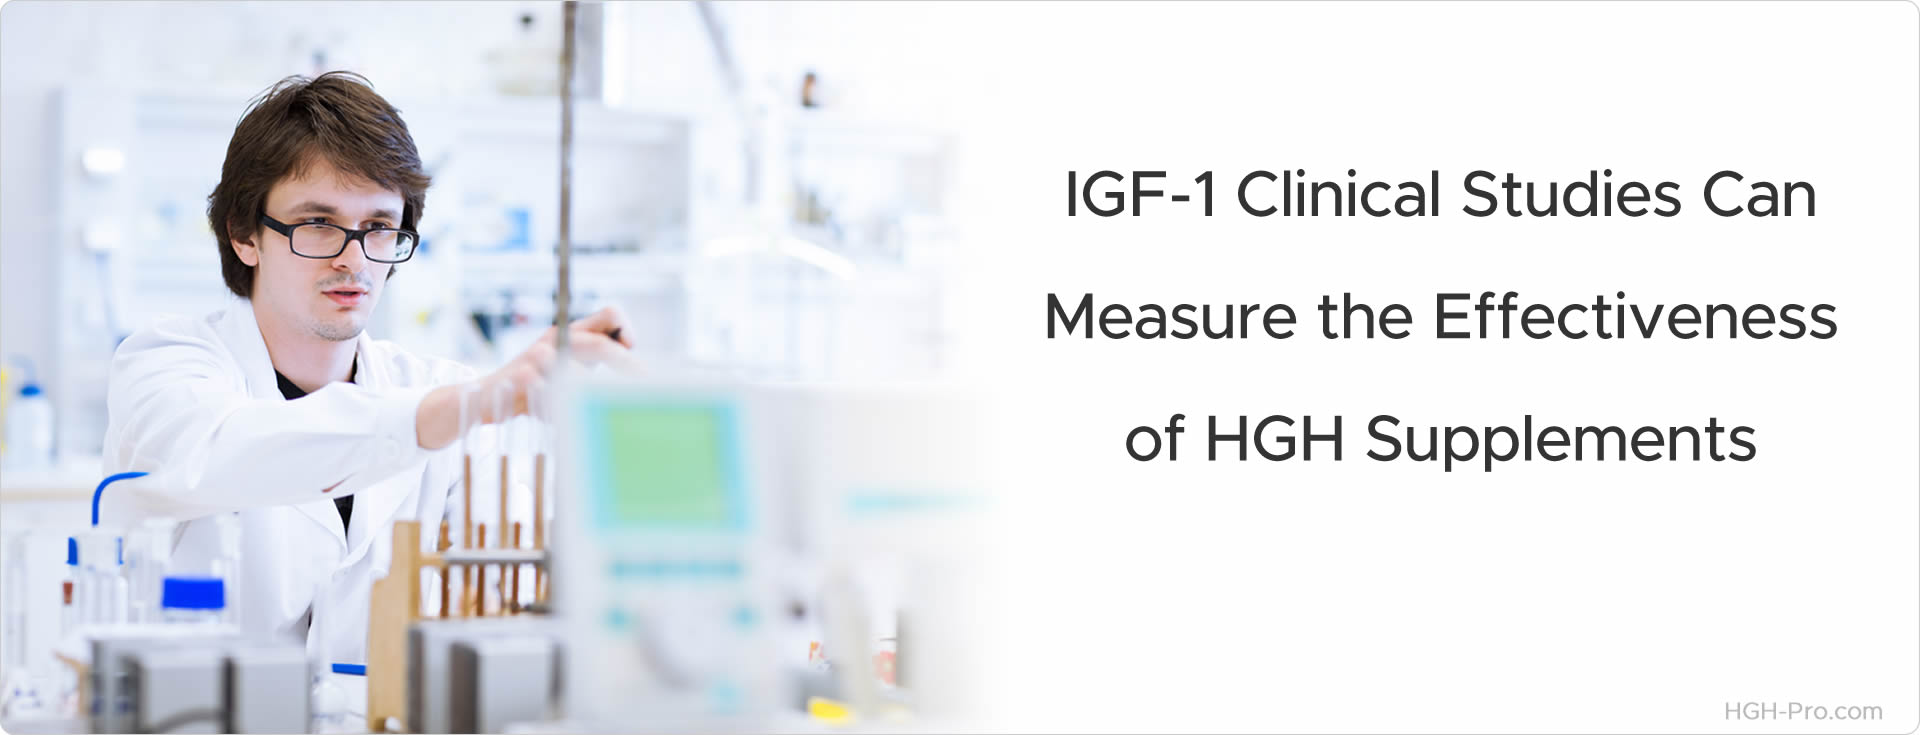 How to measure the effectiveness of HGH supplements